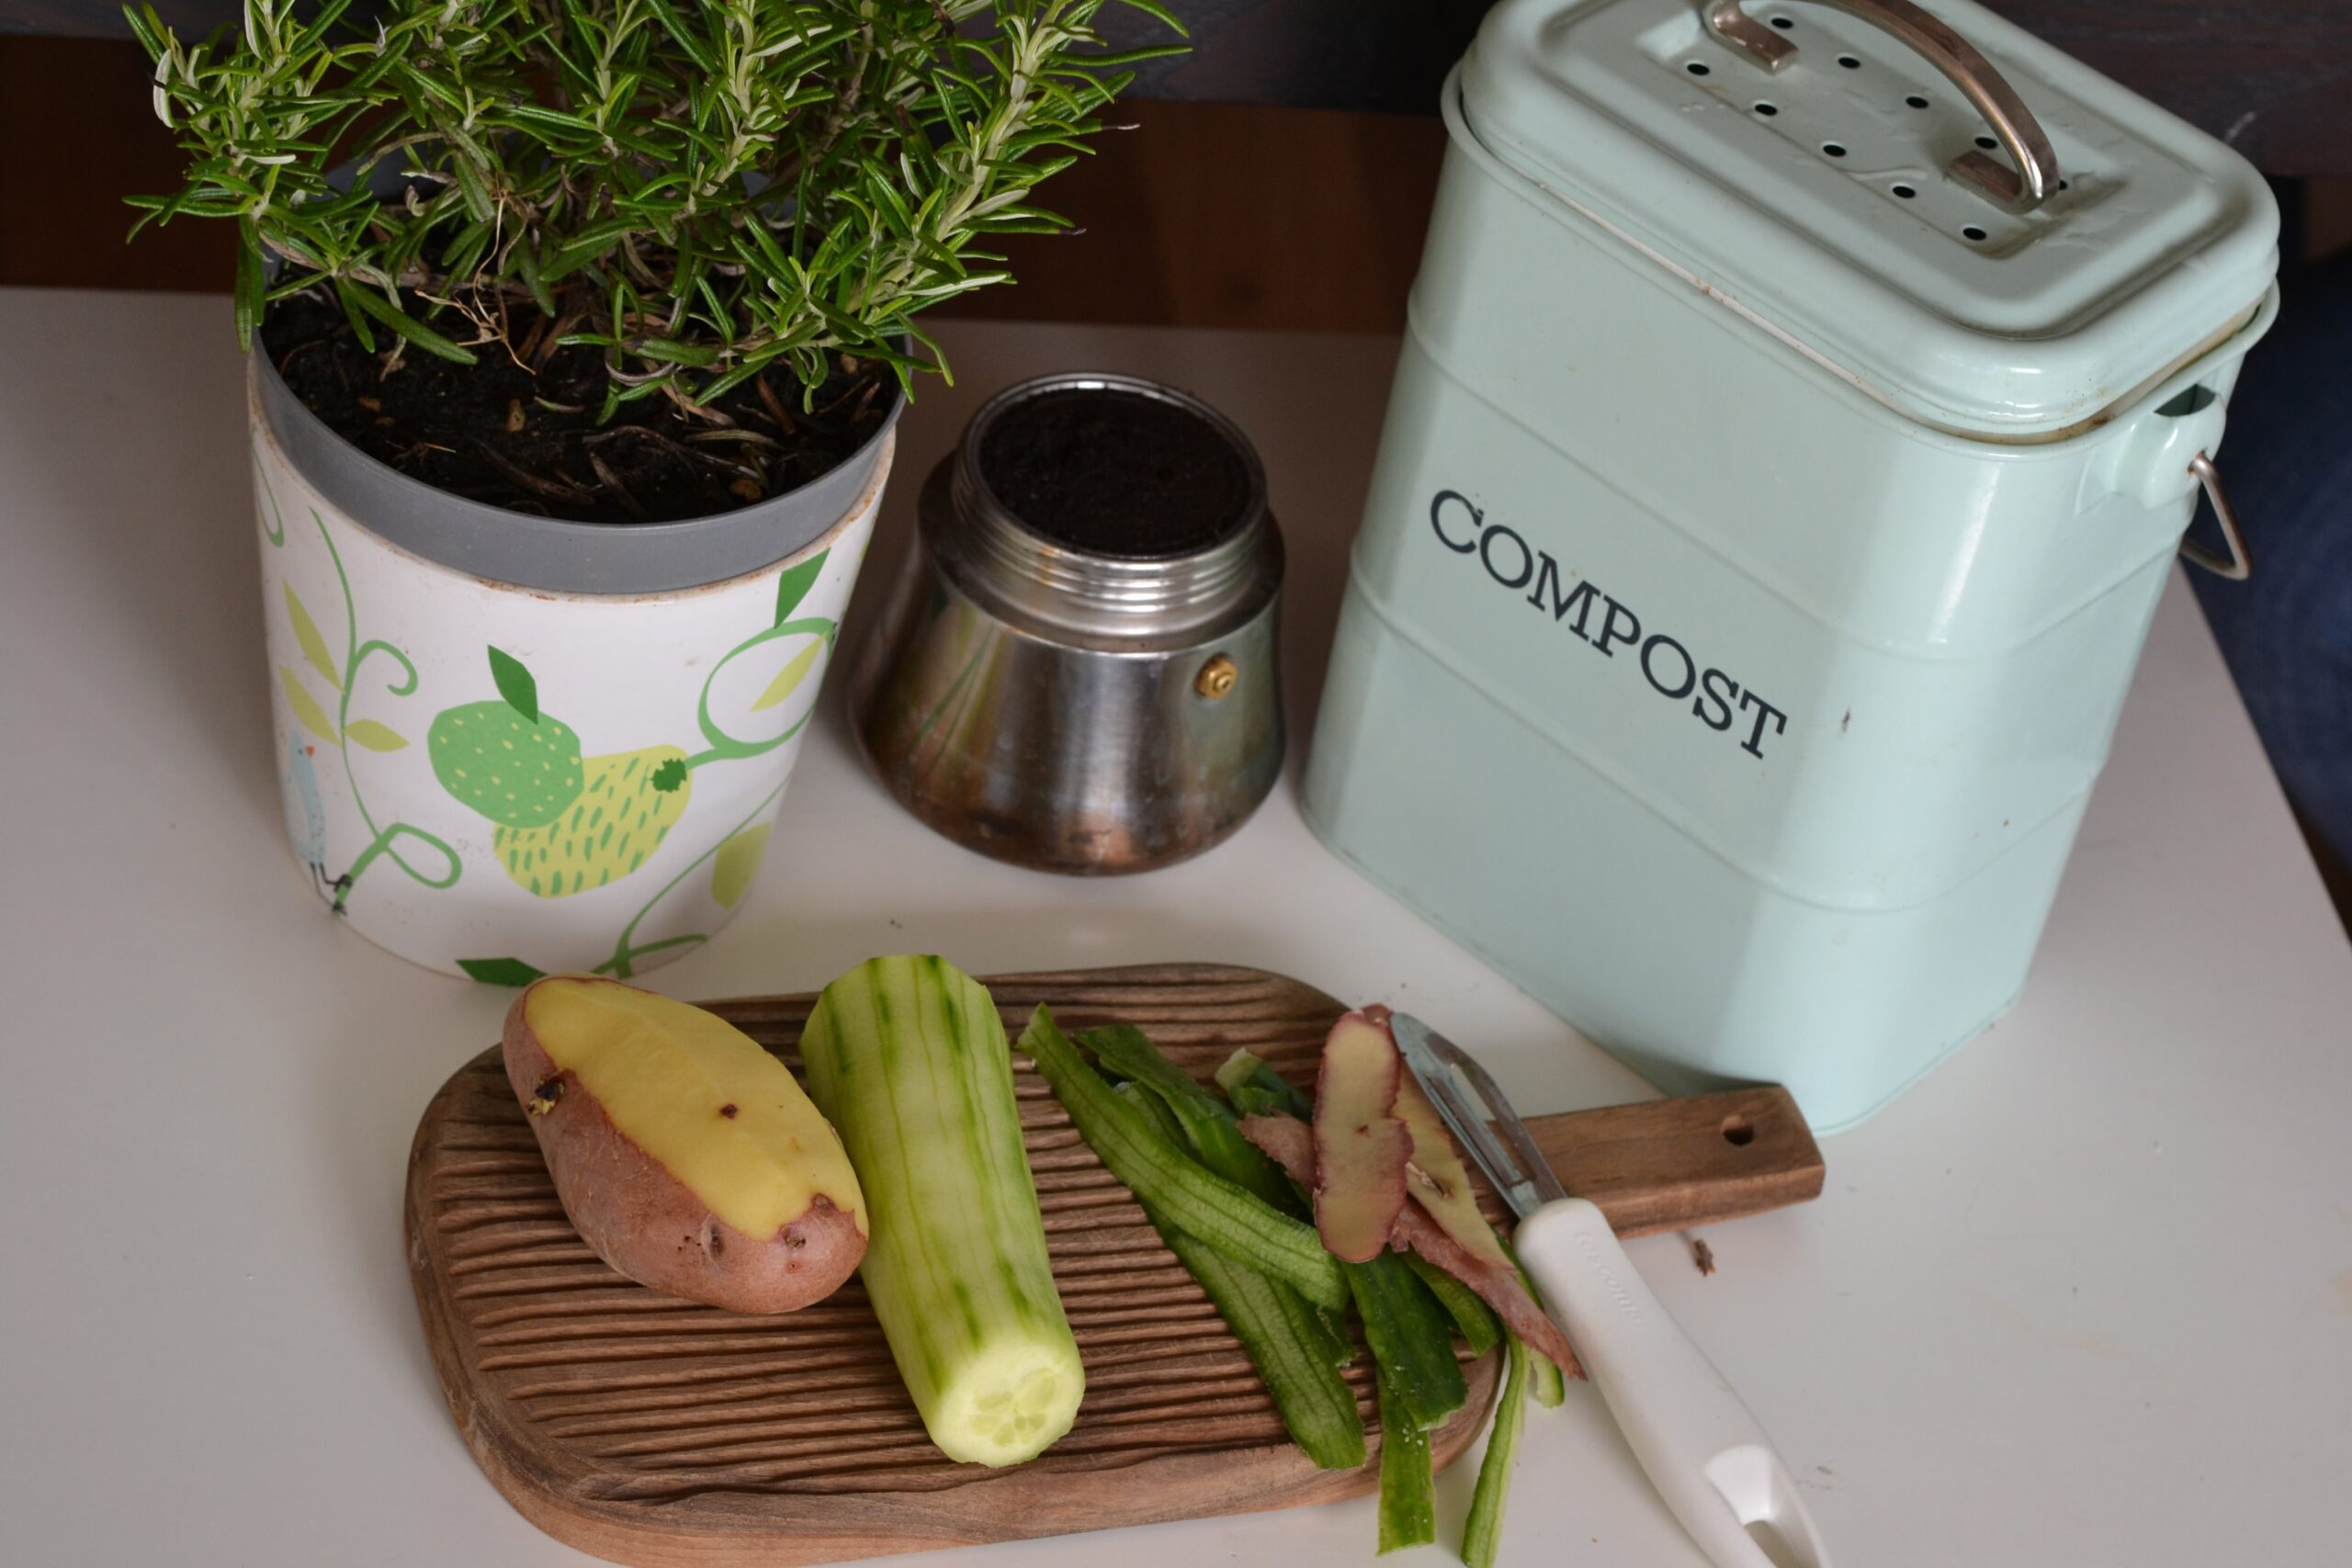 A tabletop compost jar and a cutting board with food scraps